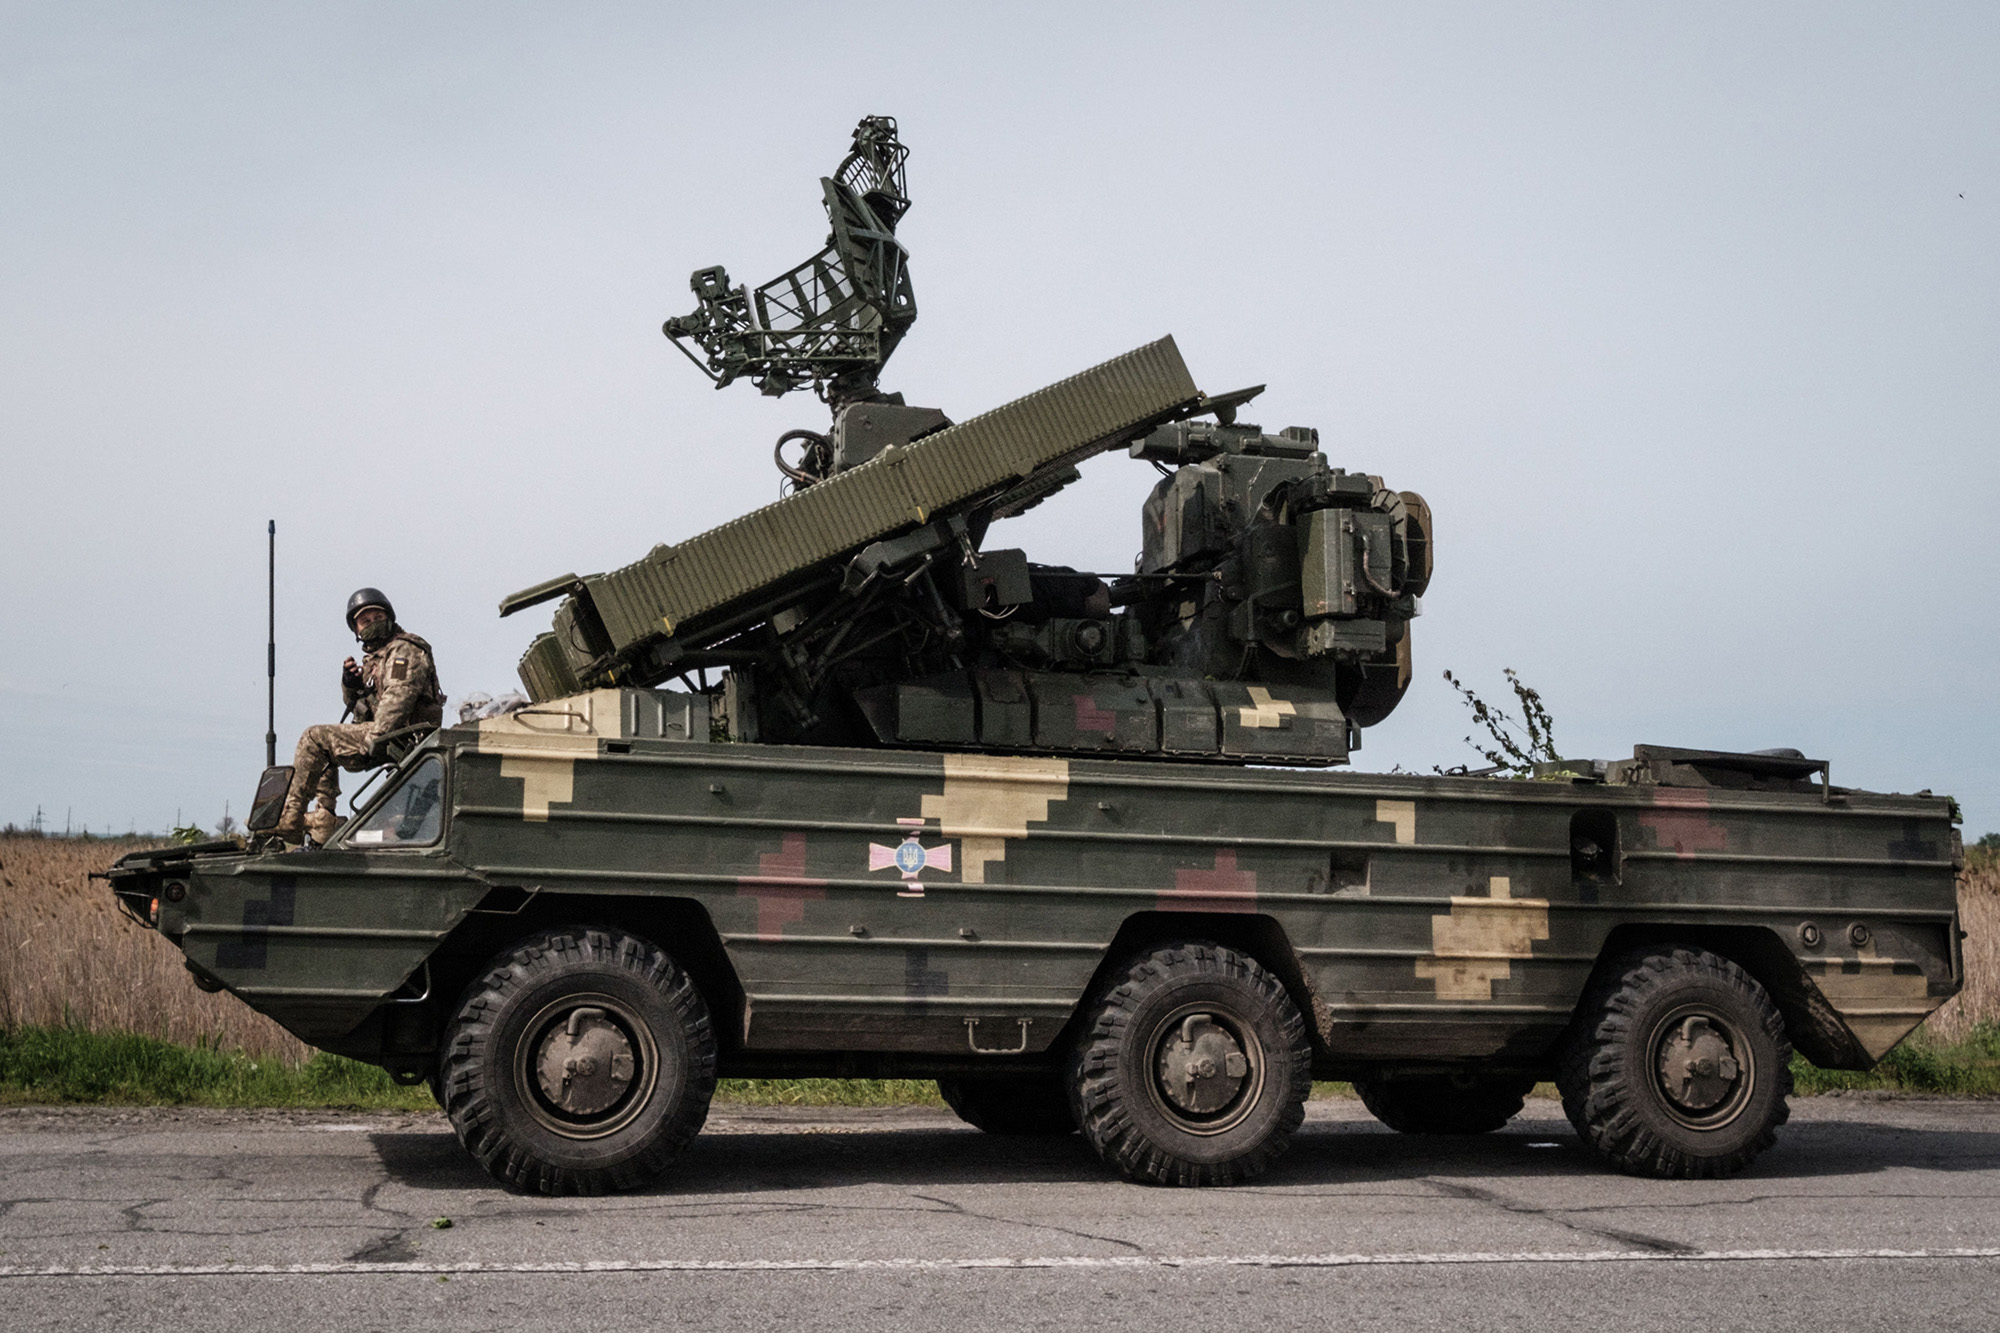 A Ukrainian soldier sits on an anti-aircraft missile system near Sloviansk, eastern Ukraine, on May 11.